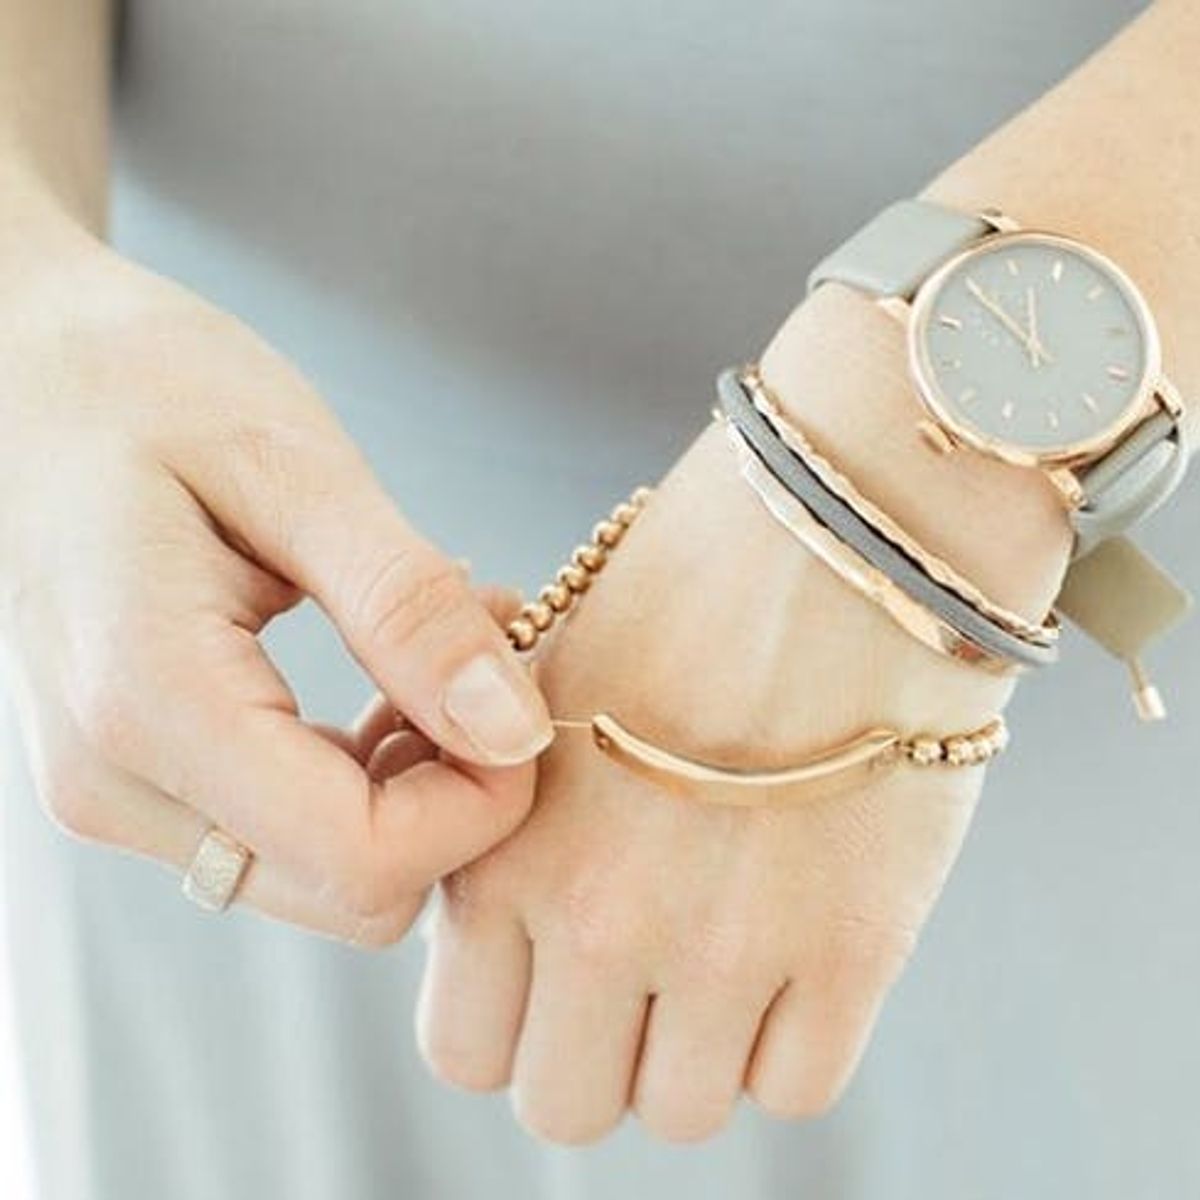 This Genius Bracelet + Hair Tie Combo Is a Total Game Changer